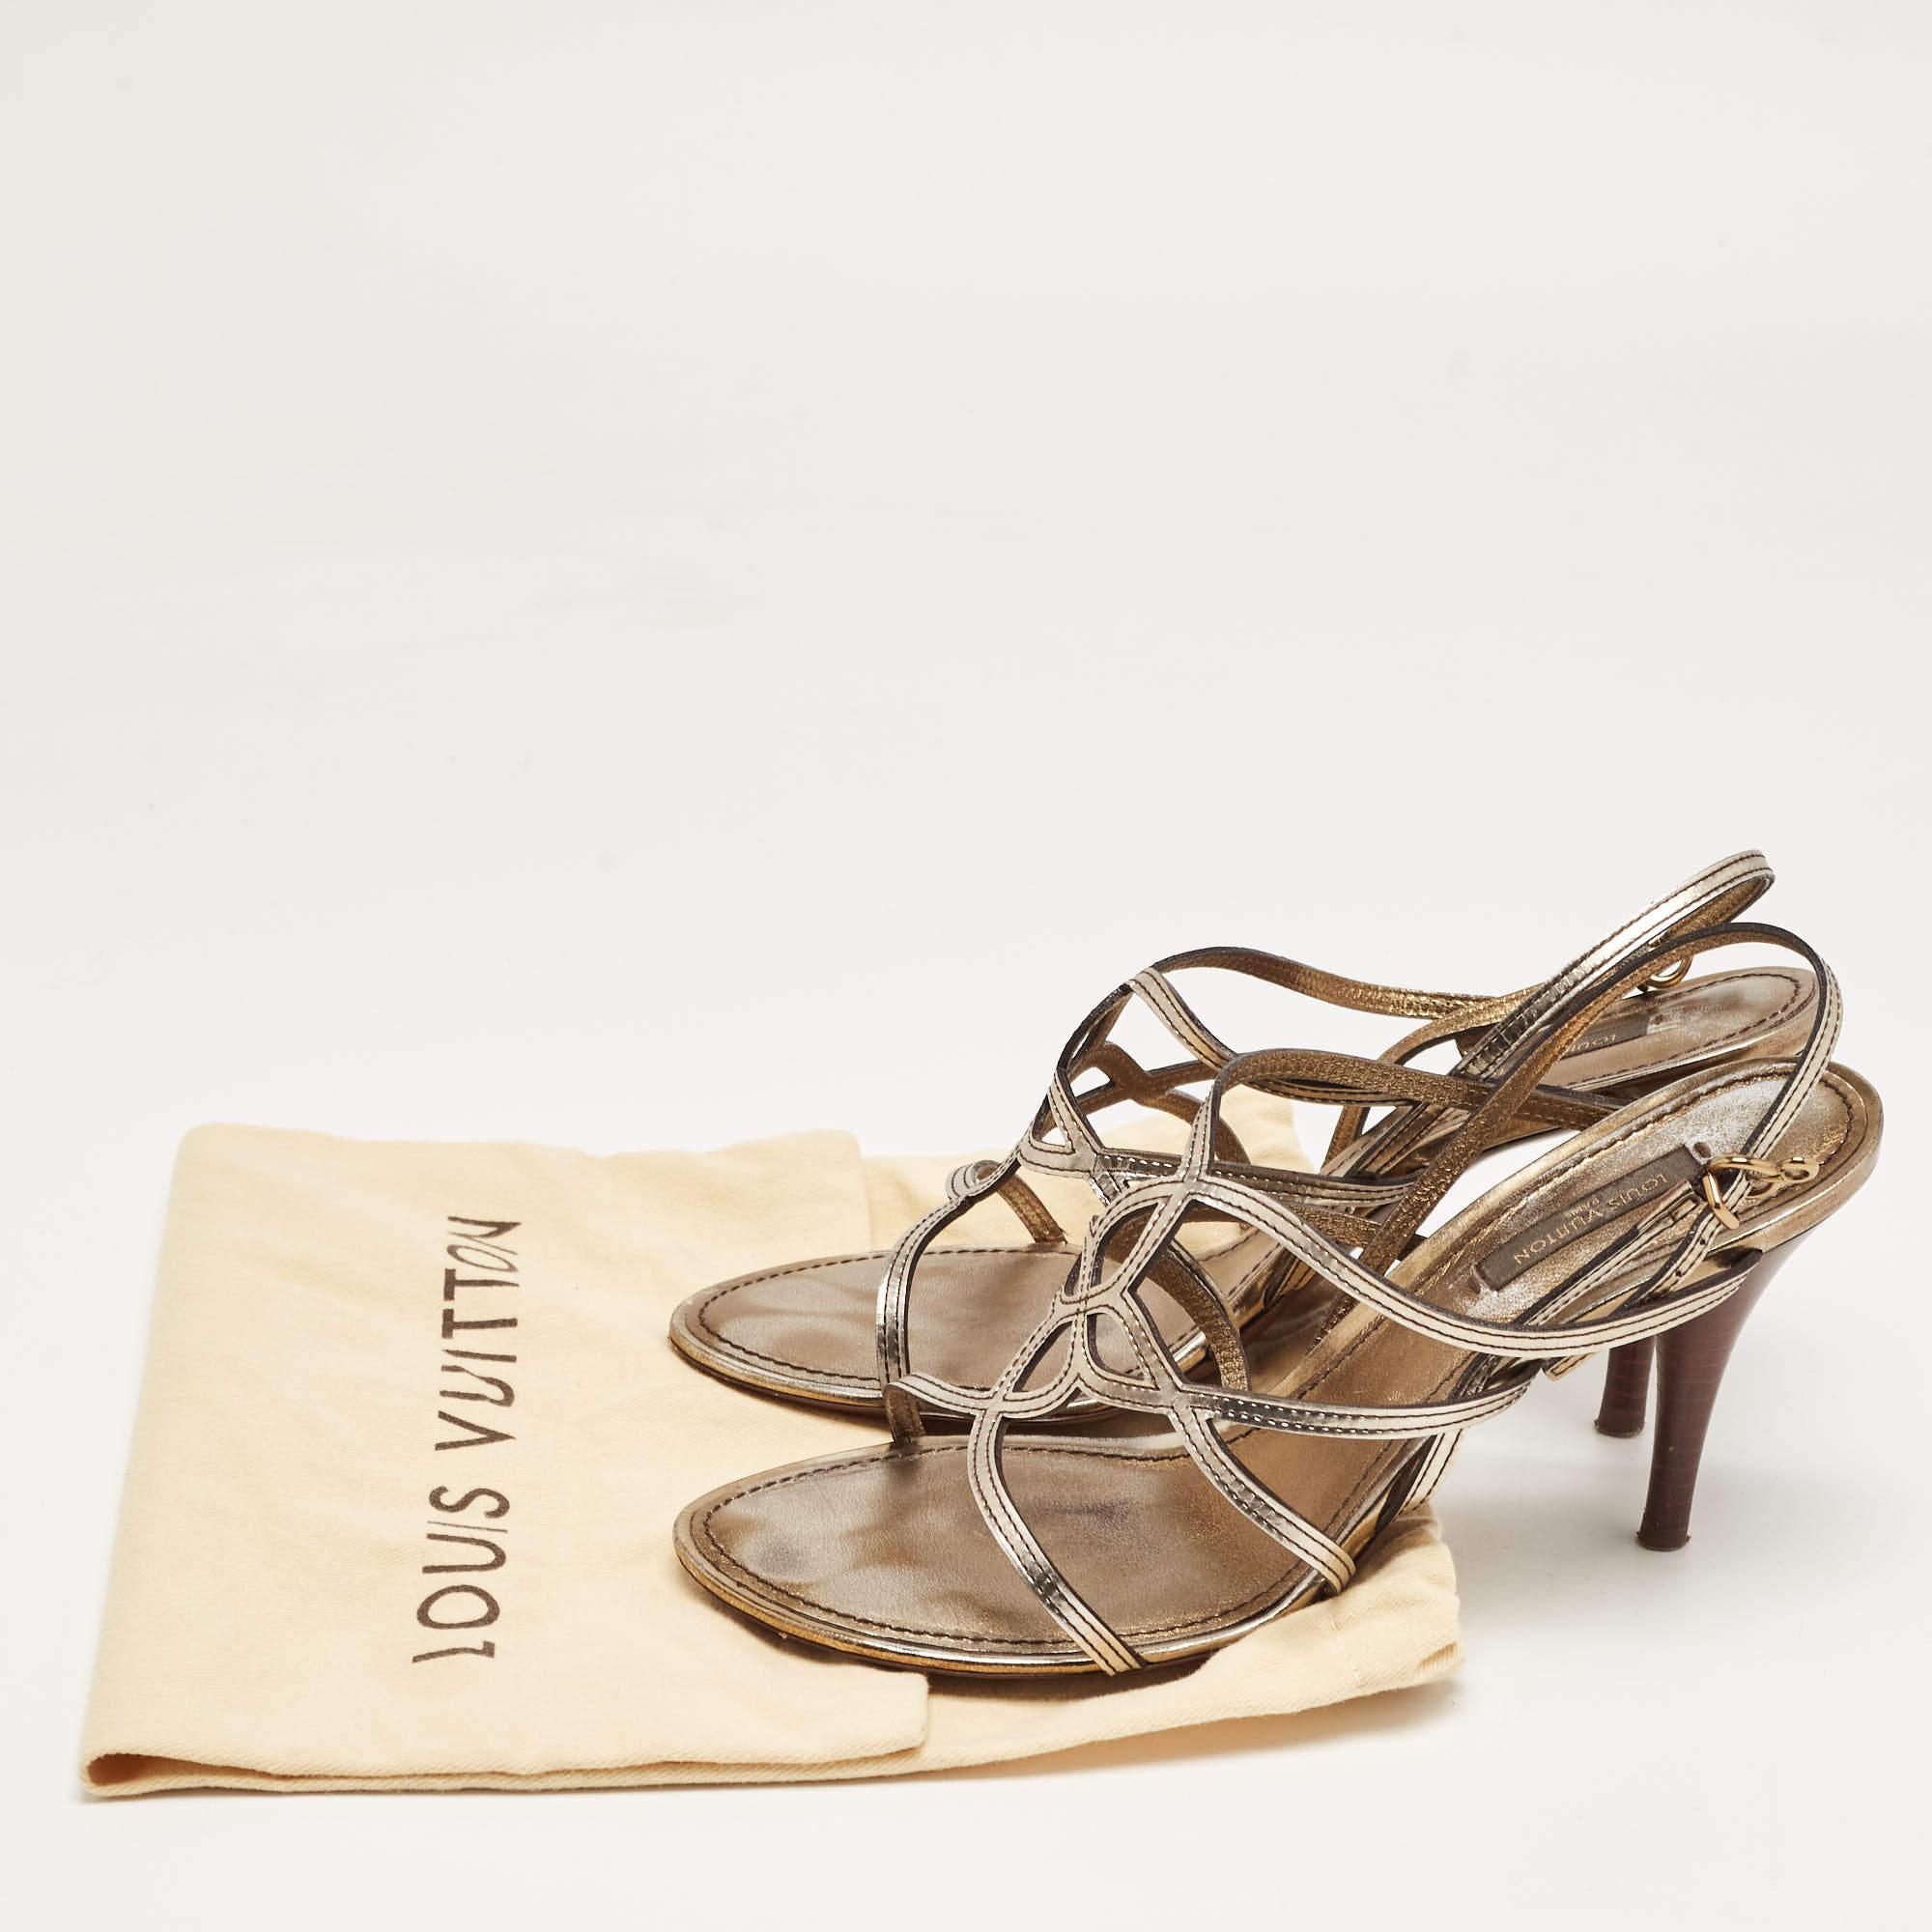 Louis Vuitton Metallic Leather Strappy Sandals Size 37.5 For Sale 5